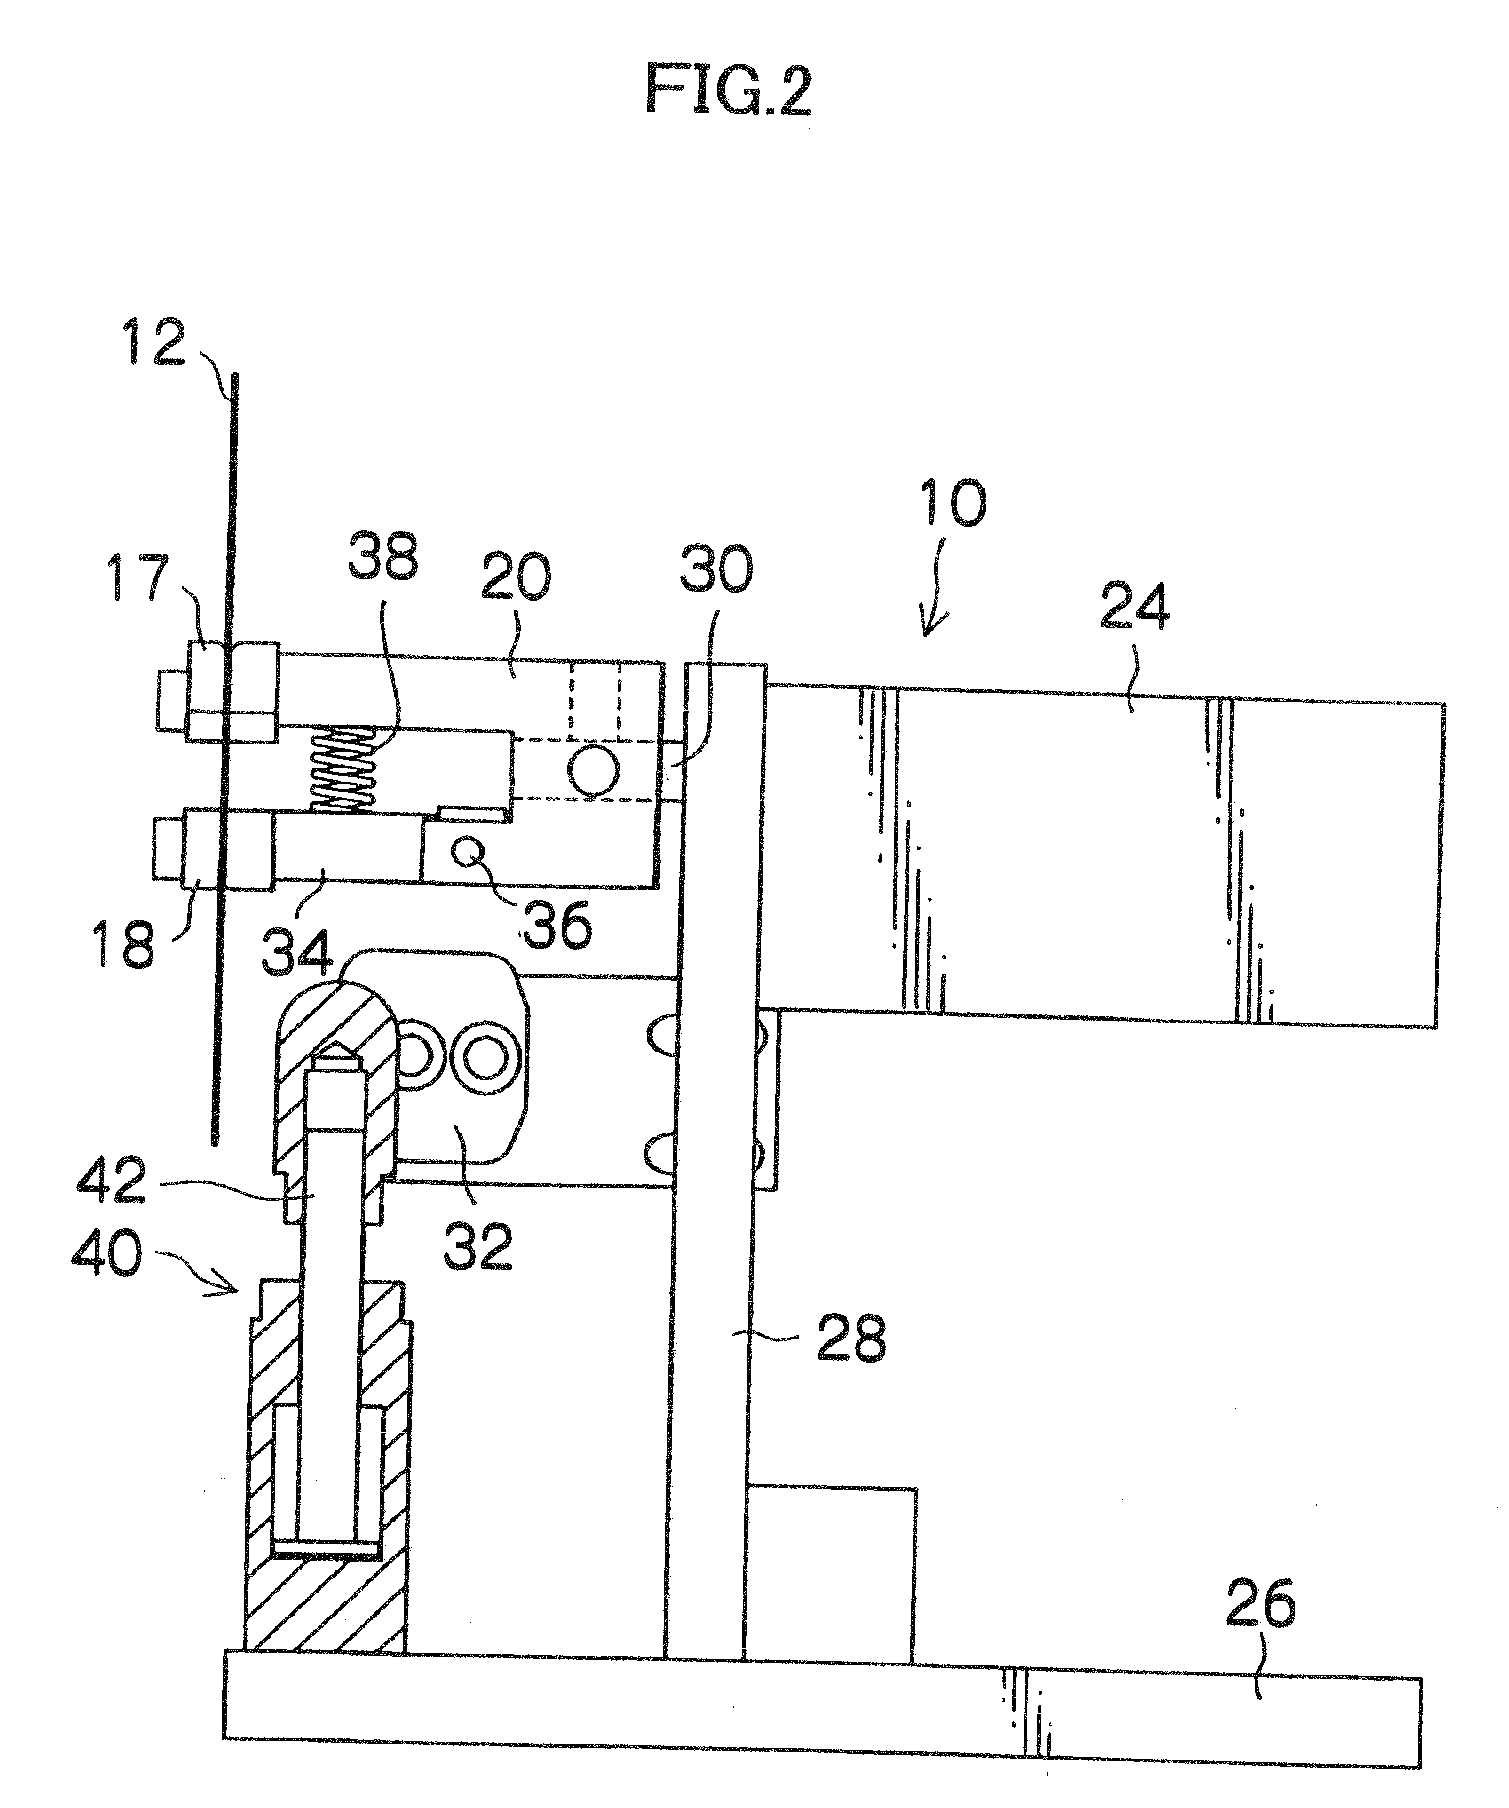 Disk inspection apparatus and method